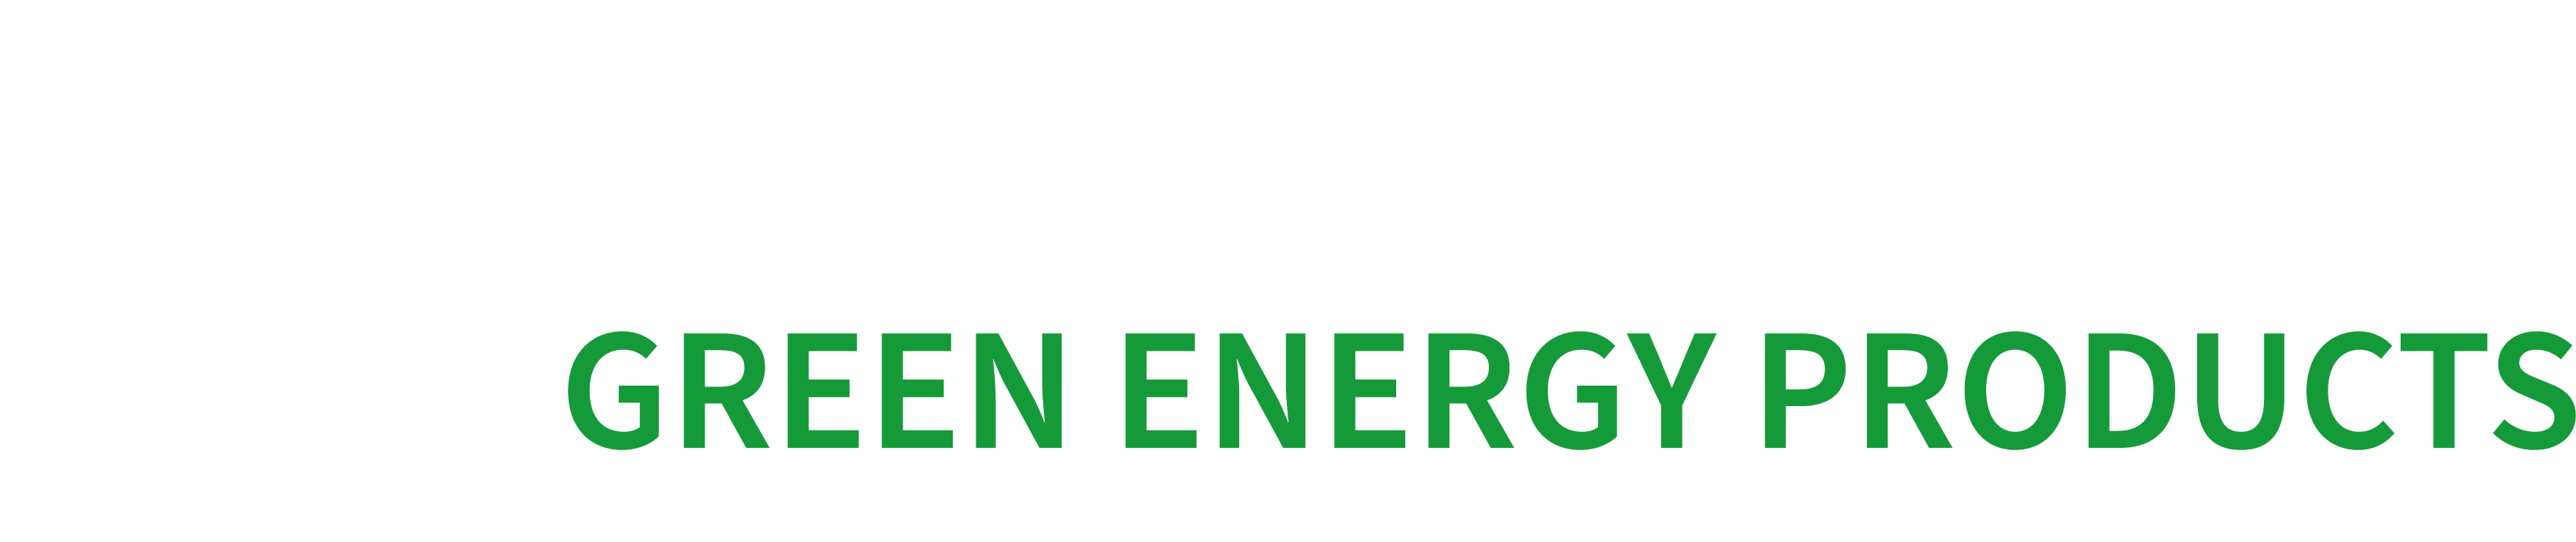 Bach-Energiesysteme-Green-Energy-Products-004